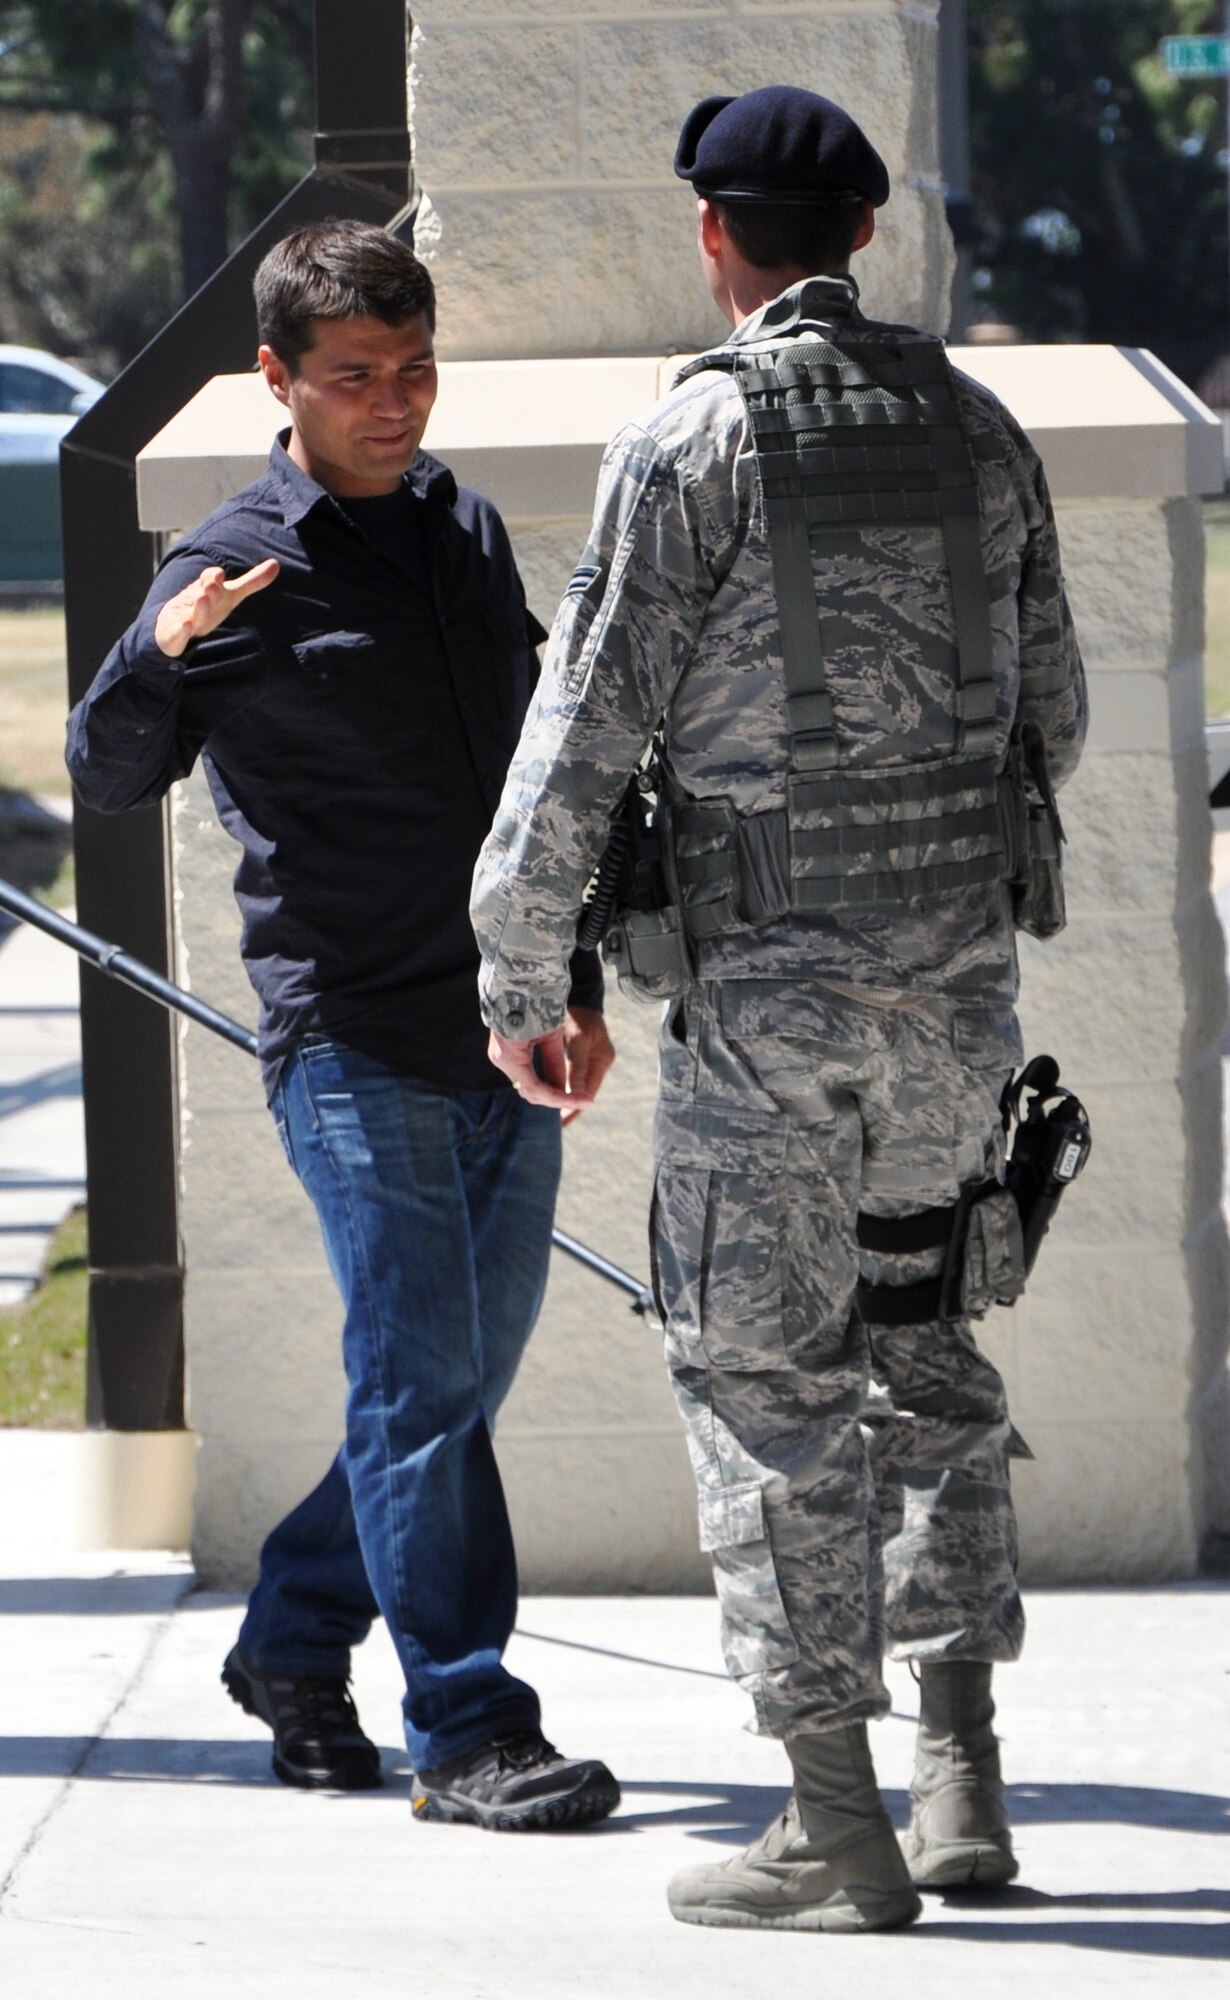 The Travel Channel’s street magician, JB Benn, greeting an Airman on March 29 at Tyndall Air Force Base. He and his crew were filming for their TV show “Magic Man,” which focuses on Mr. Benn stunning the average by stander on the street with his magic.